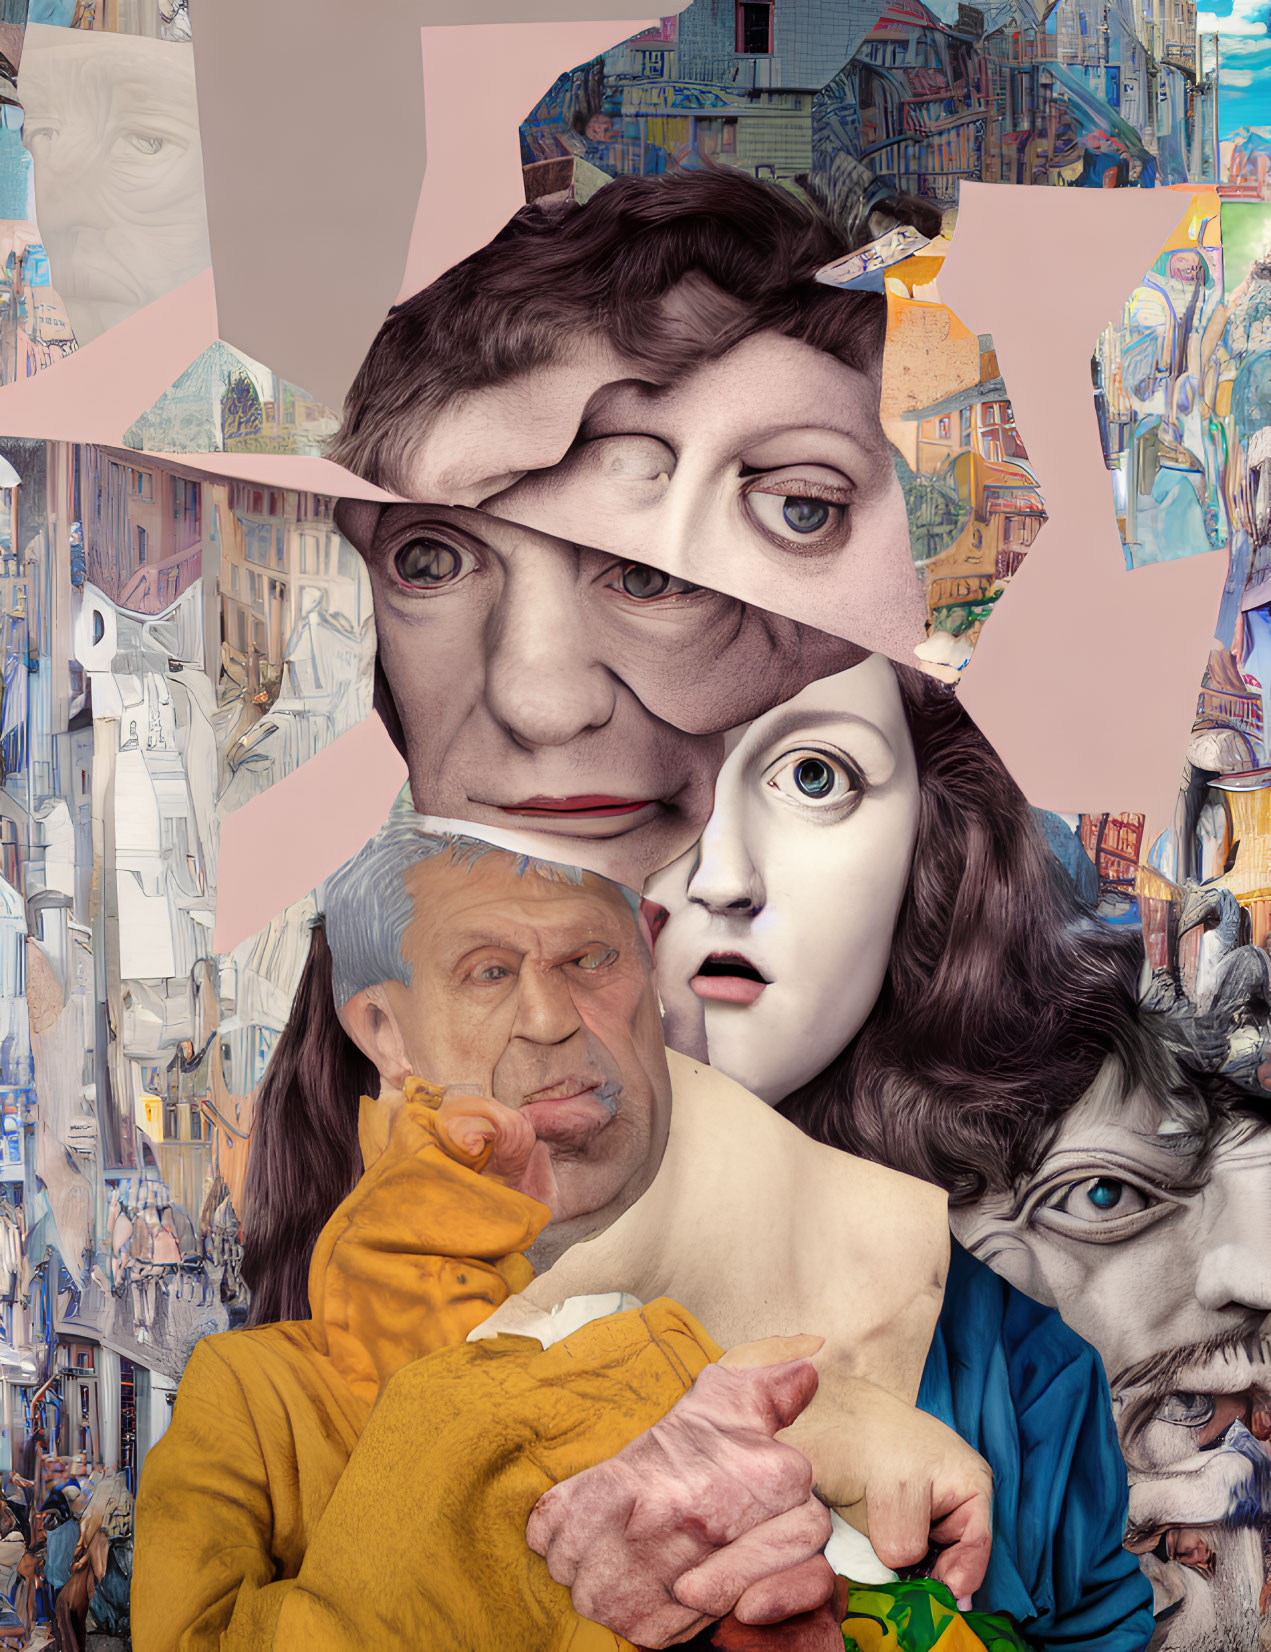 Surreal collage of overlapping faces against urban backdrop